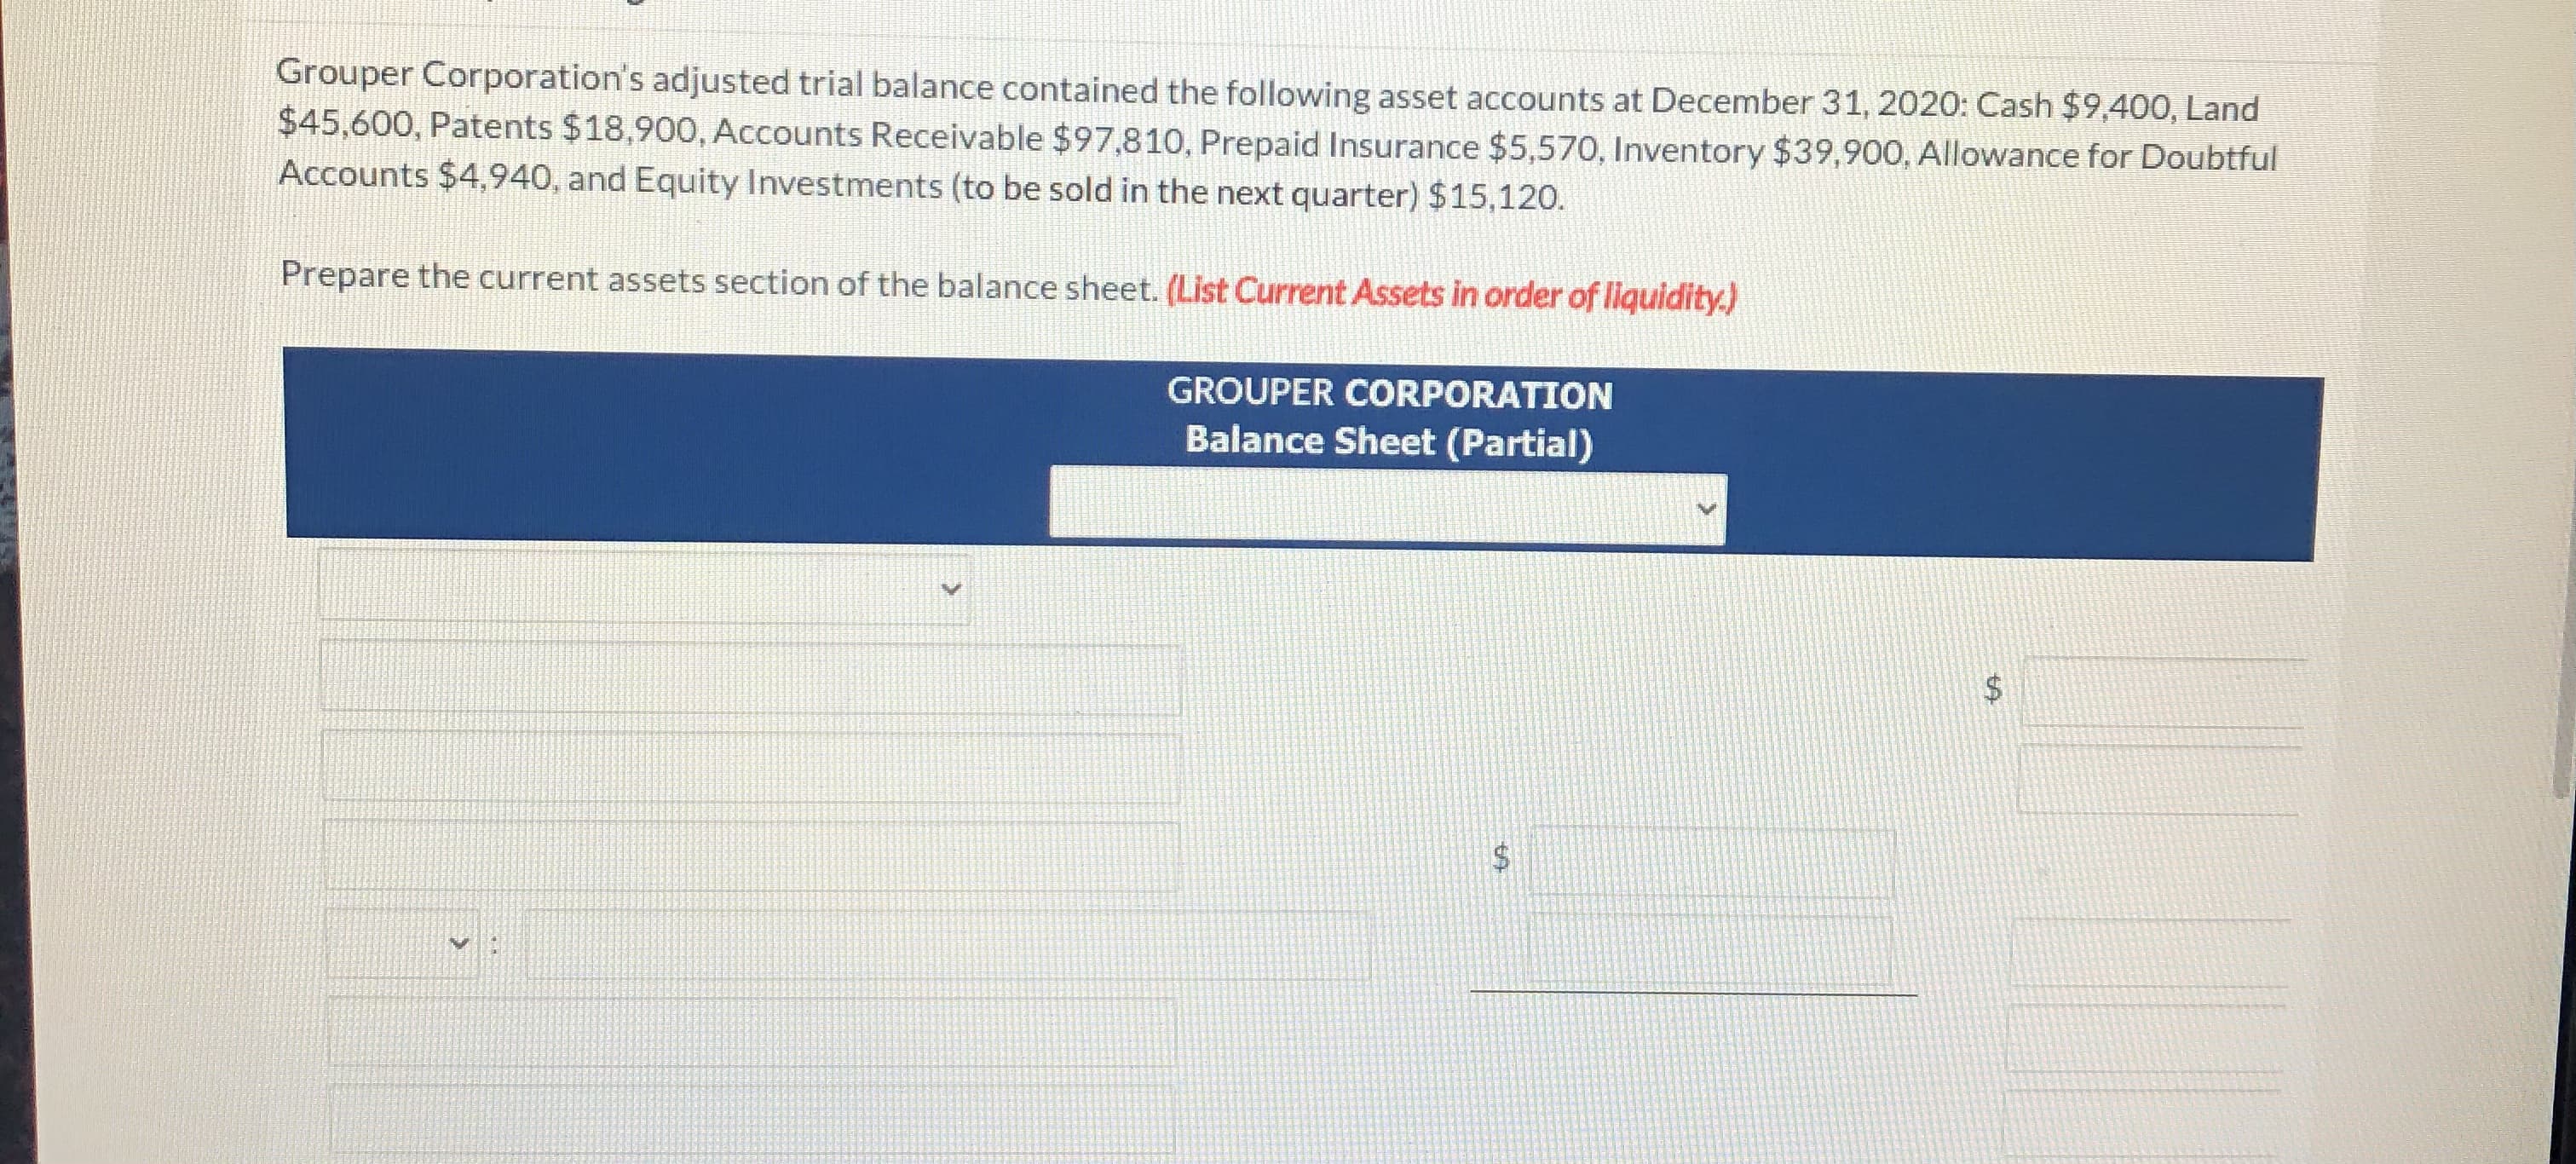 Grouper Corporation's adjusted trial balance contained the following asset accounts at December 31, 2020: Cash $9,400, Land
$45,600, Patents $18,900, Accounts Receivable $97,810, Prepaid Insurance $5,570, Inventory $39,900, Allowance for Doubtful
Accounts $4,940, and Equity Investments (to be sold in the next quarter) $15,120.
Prepare the current assets section of the balance sheet. (List Current Assets in order of liquidity.)
